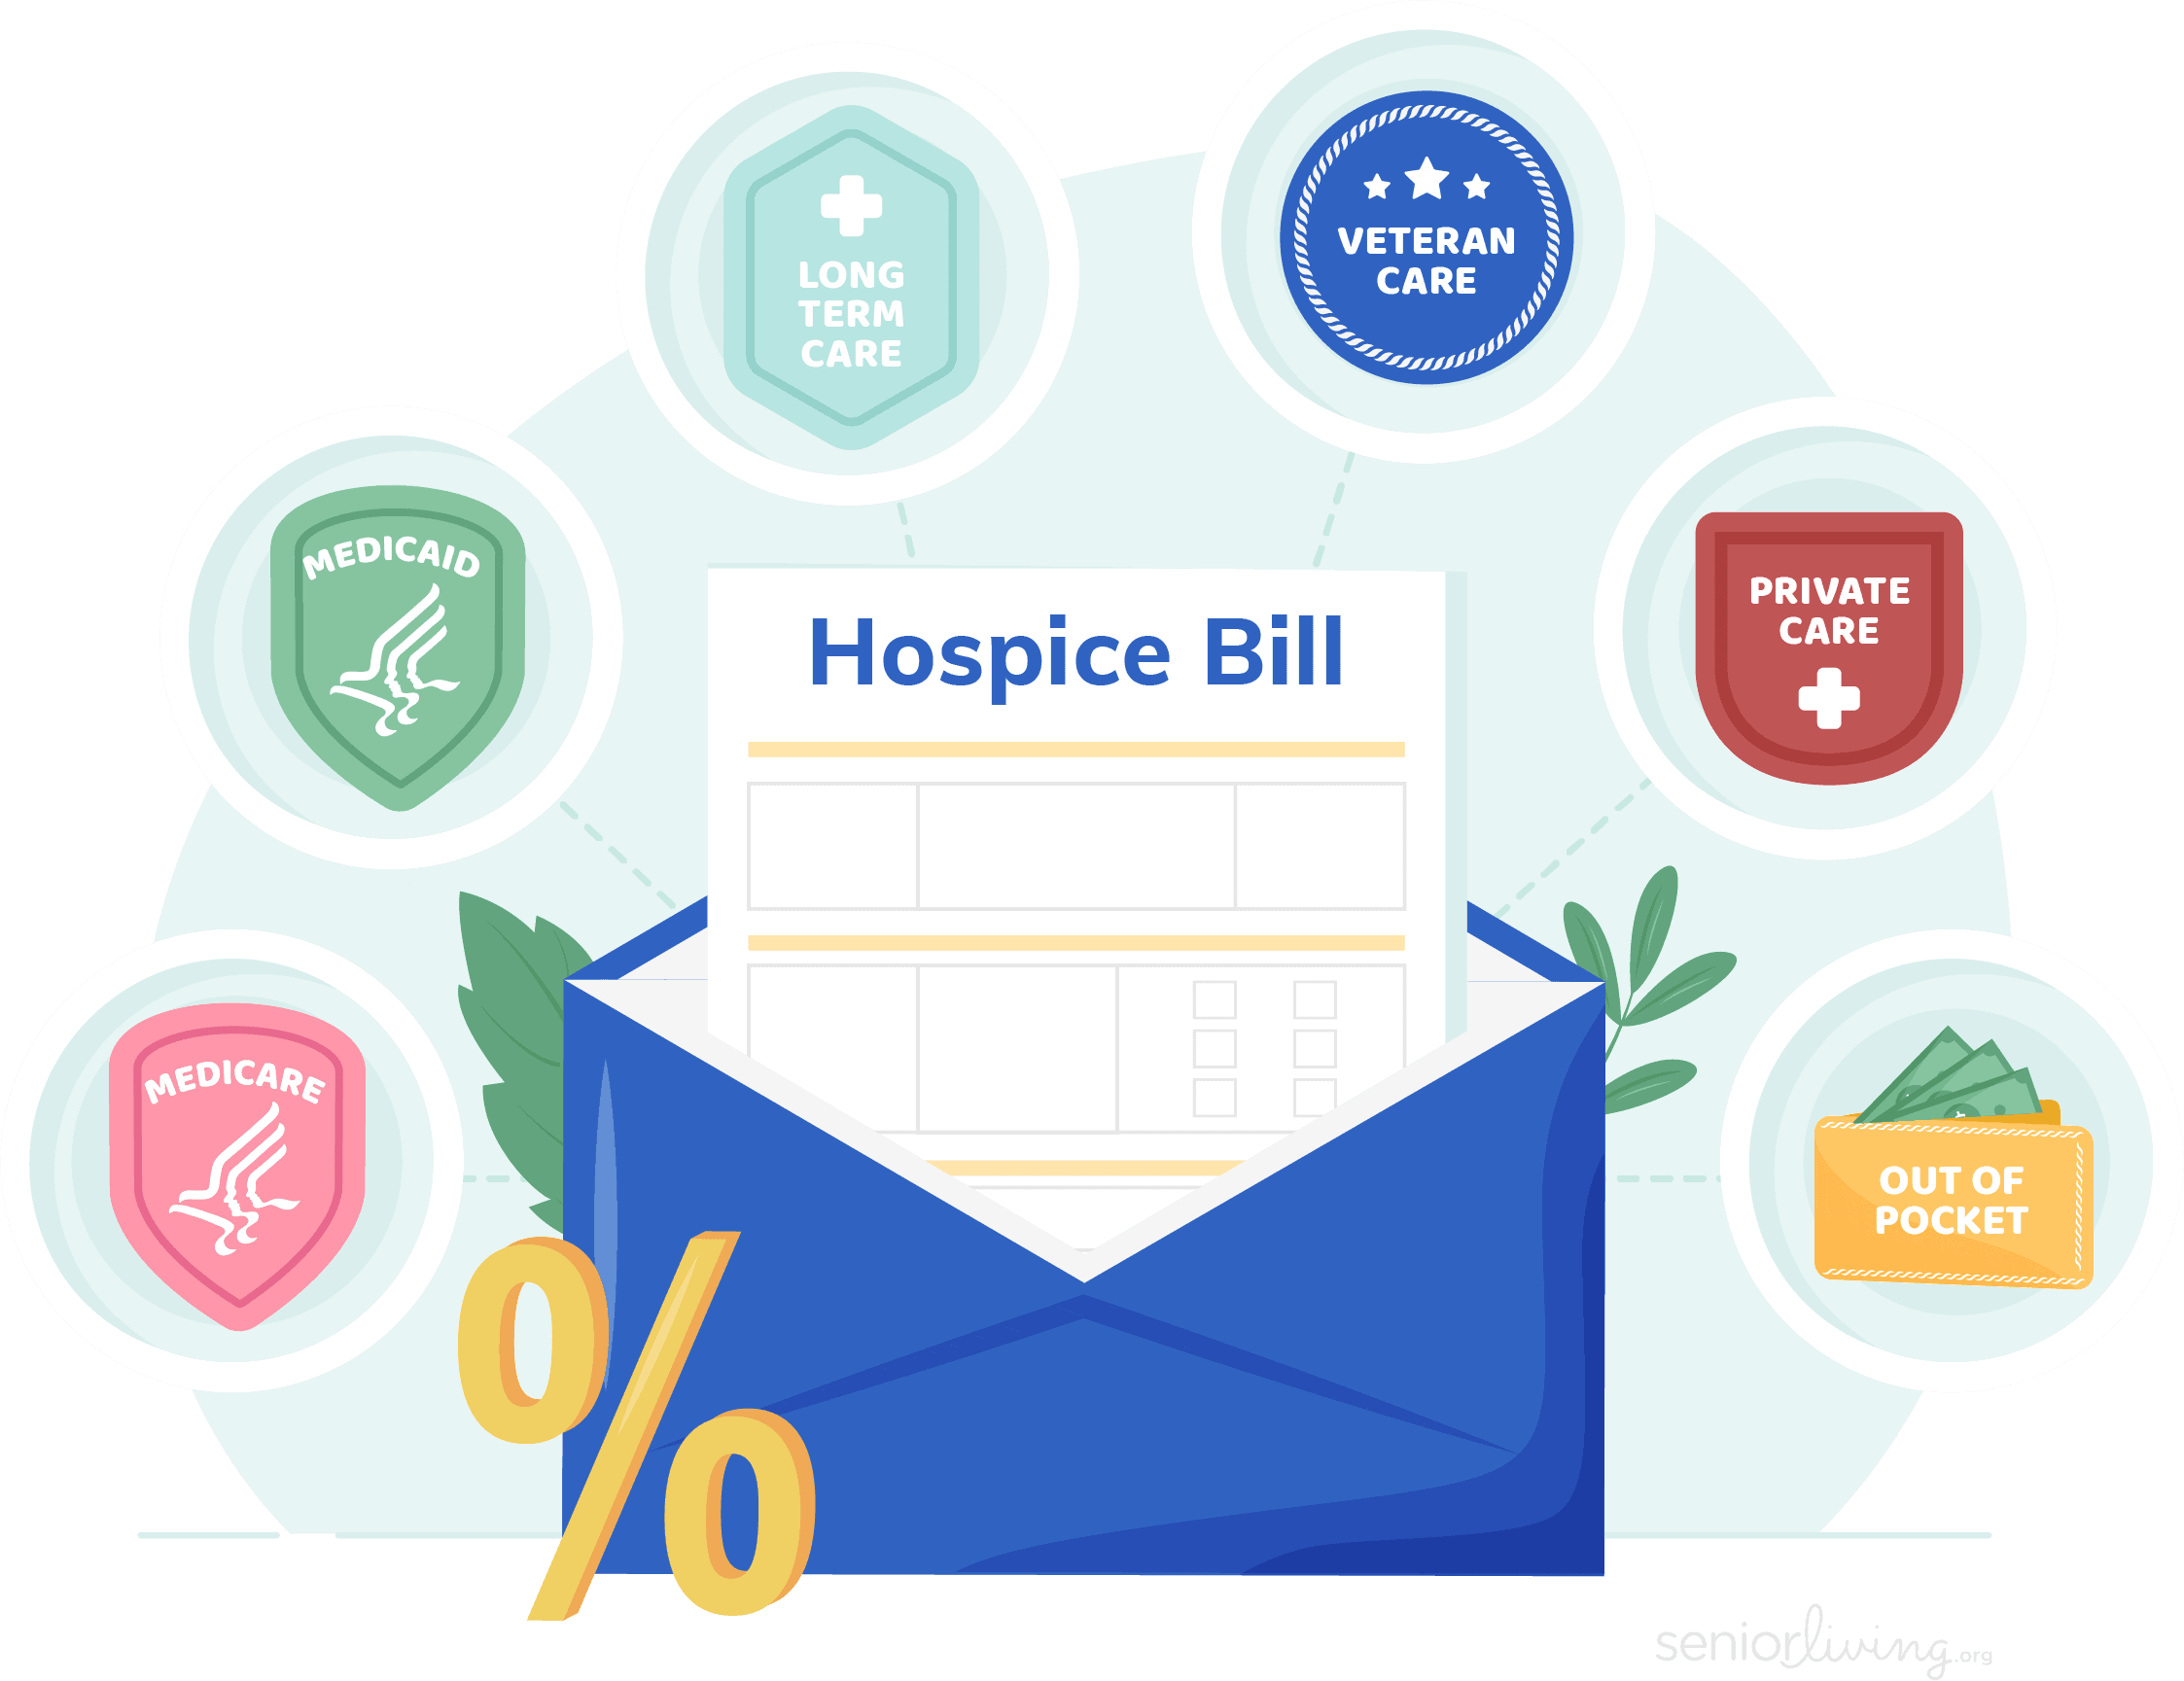 How to pay for hospice care